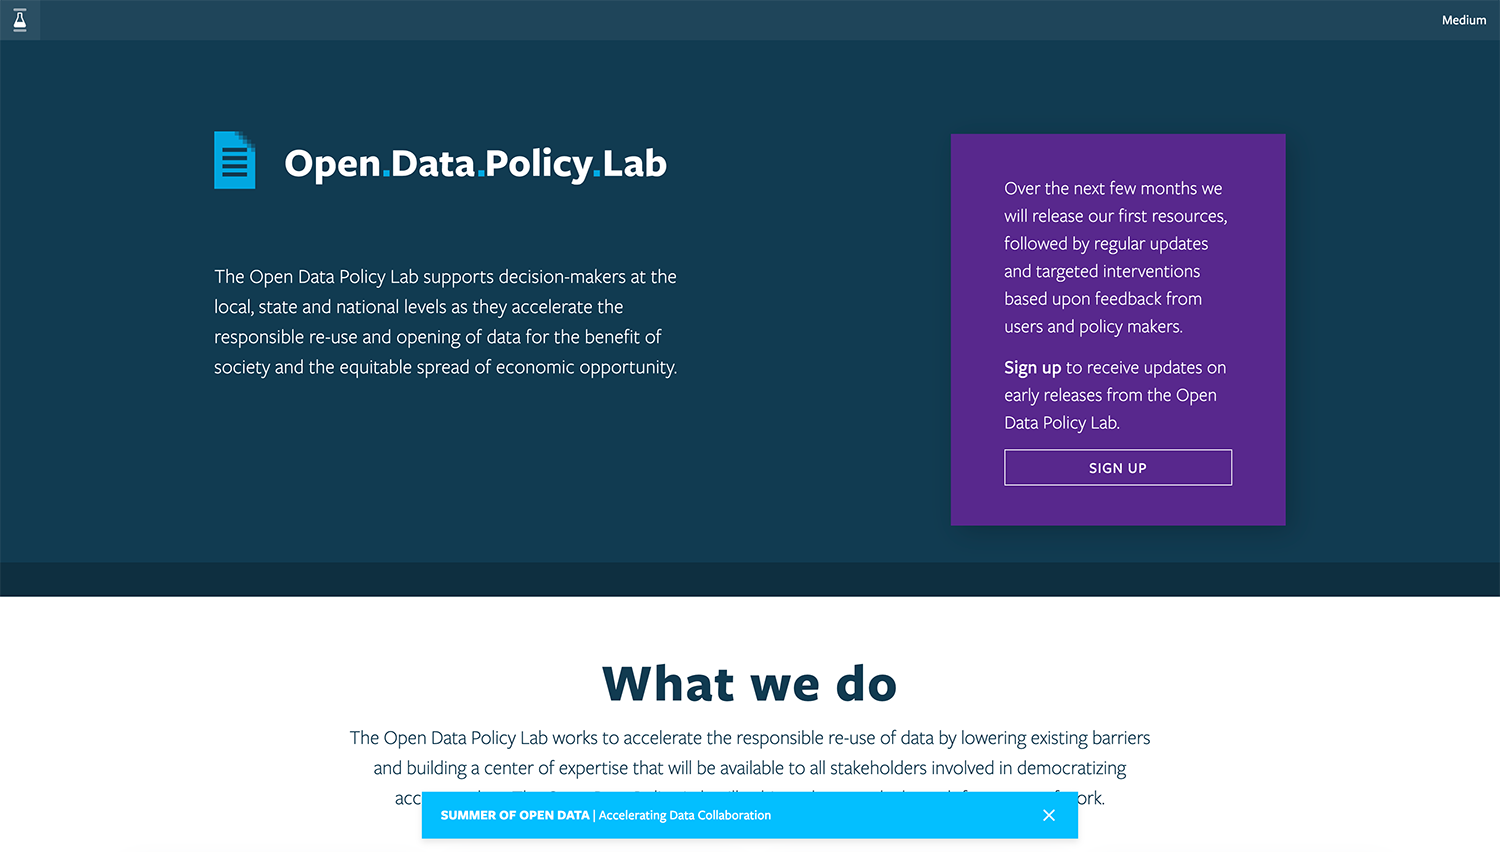 Open Data Policy Lab